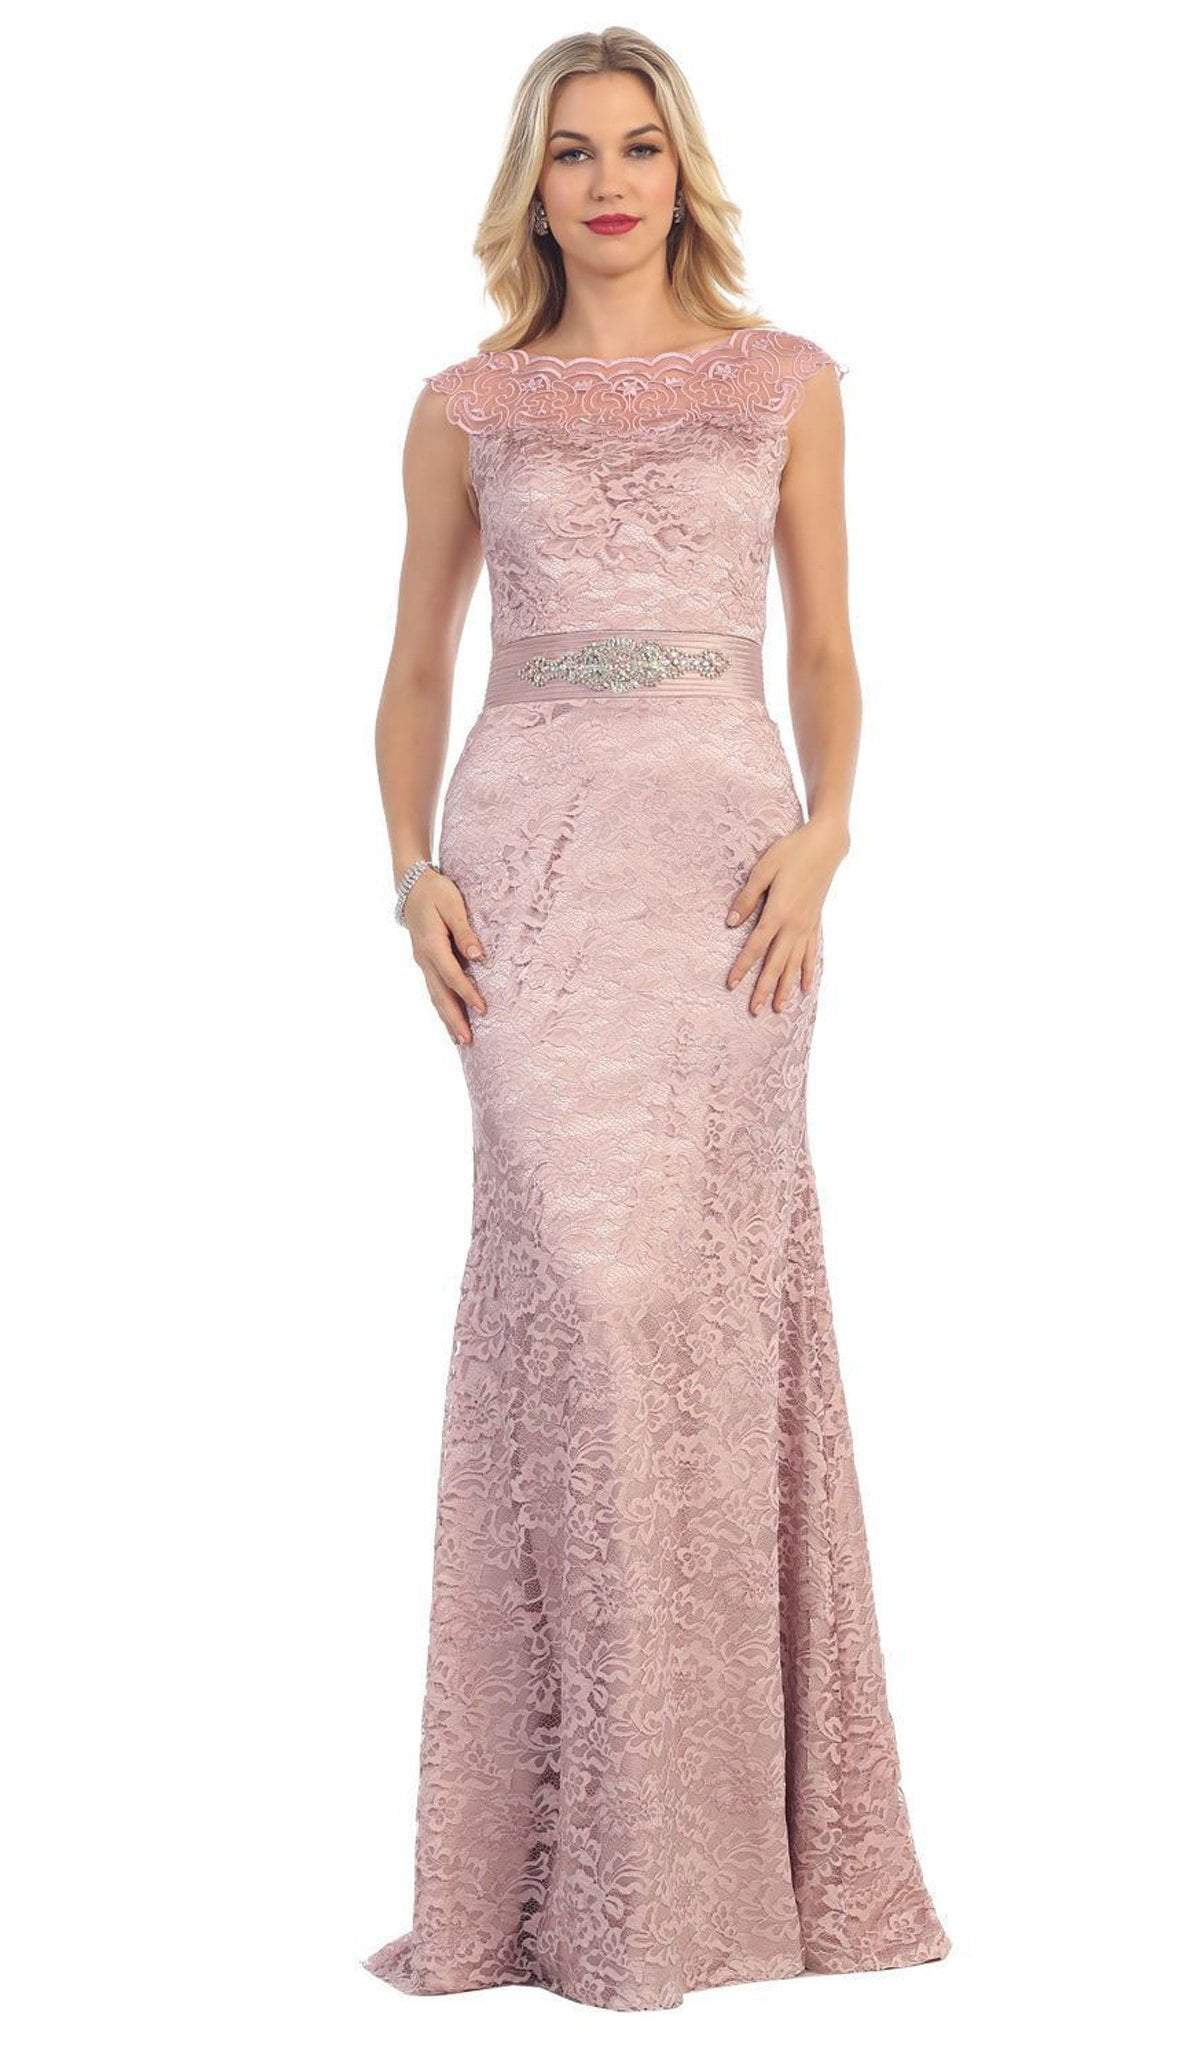 May Queen - MQ1237 Charming Cap Sleeved Bateau Neck Long Formal Dress Special Occasion Dress 6 / Mauve